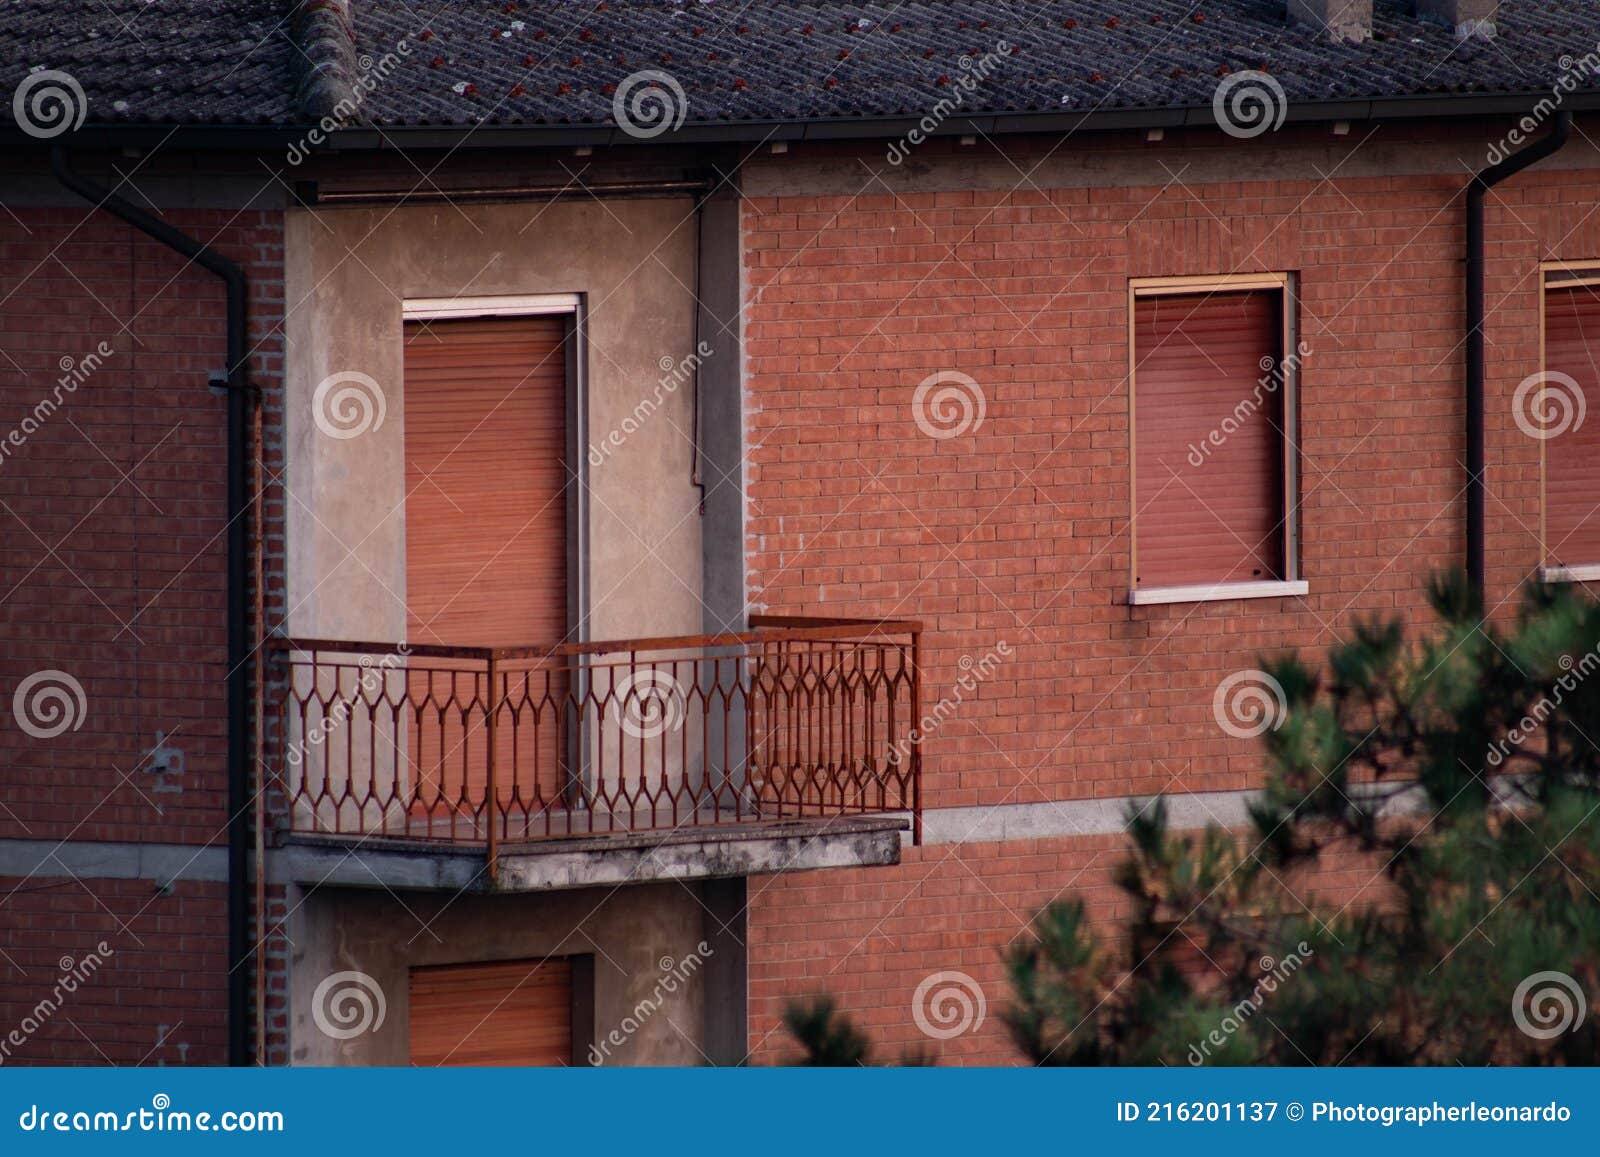 abandoned apartment with brick facades and closed windows, italy